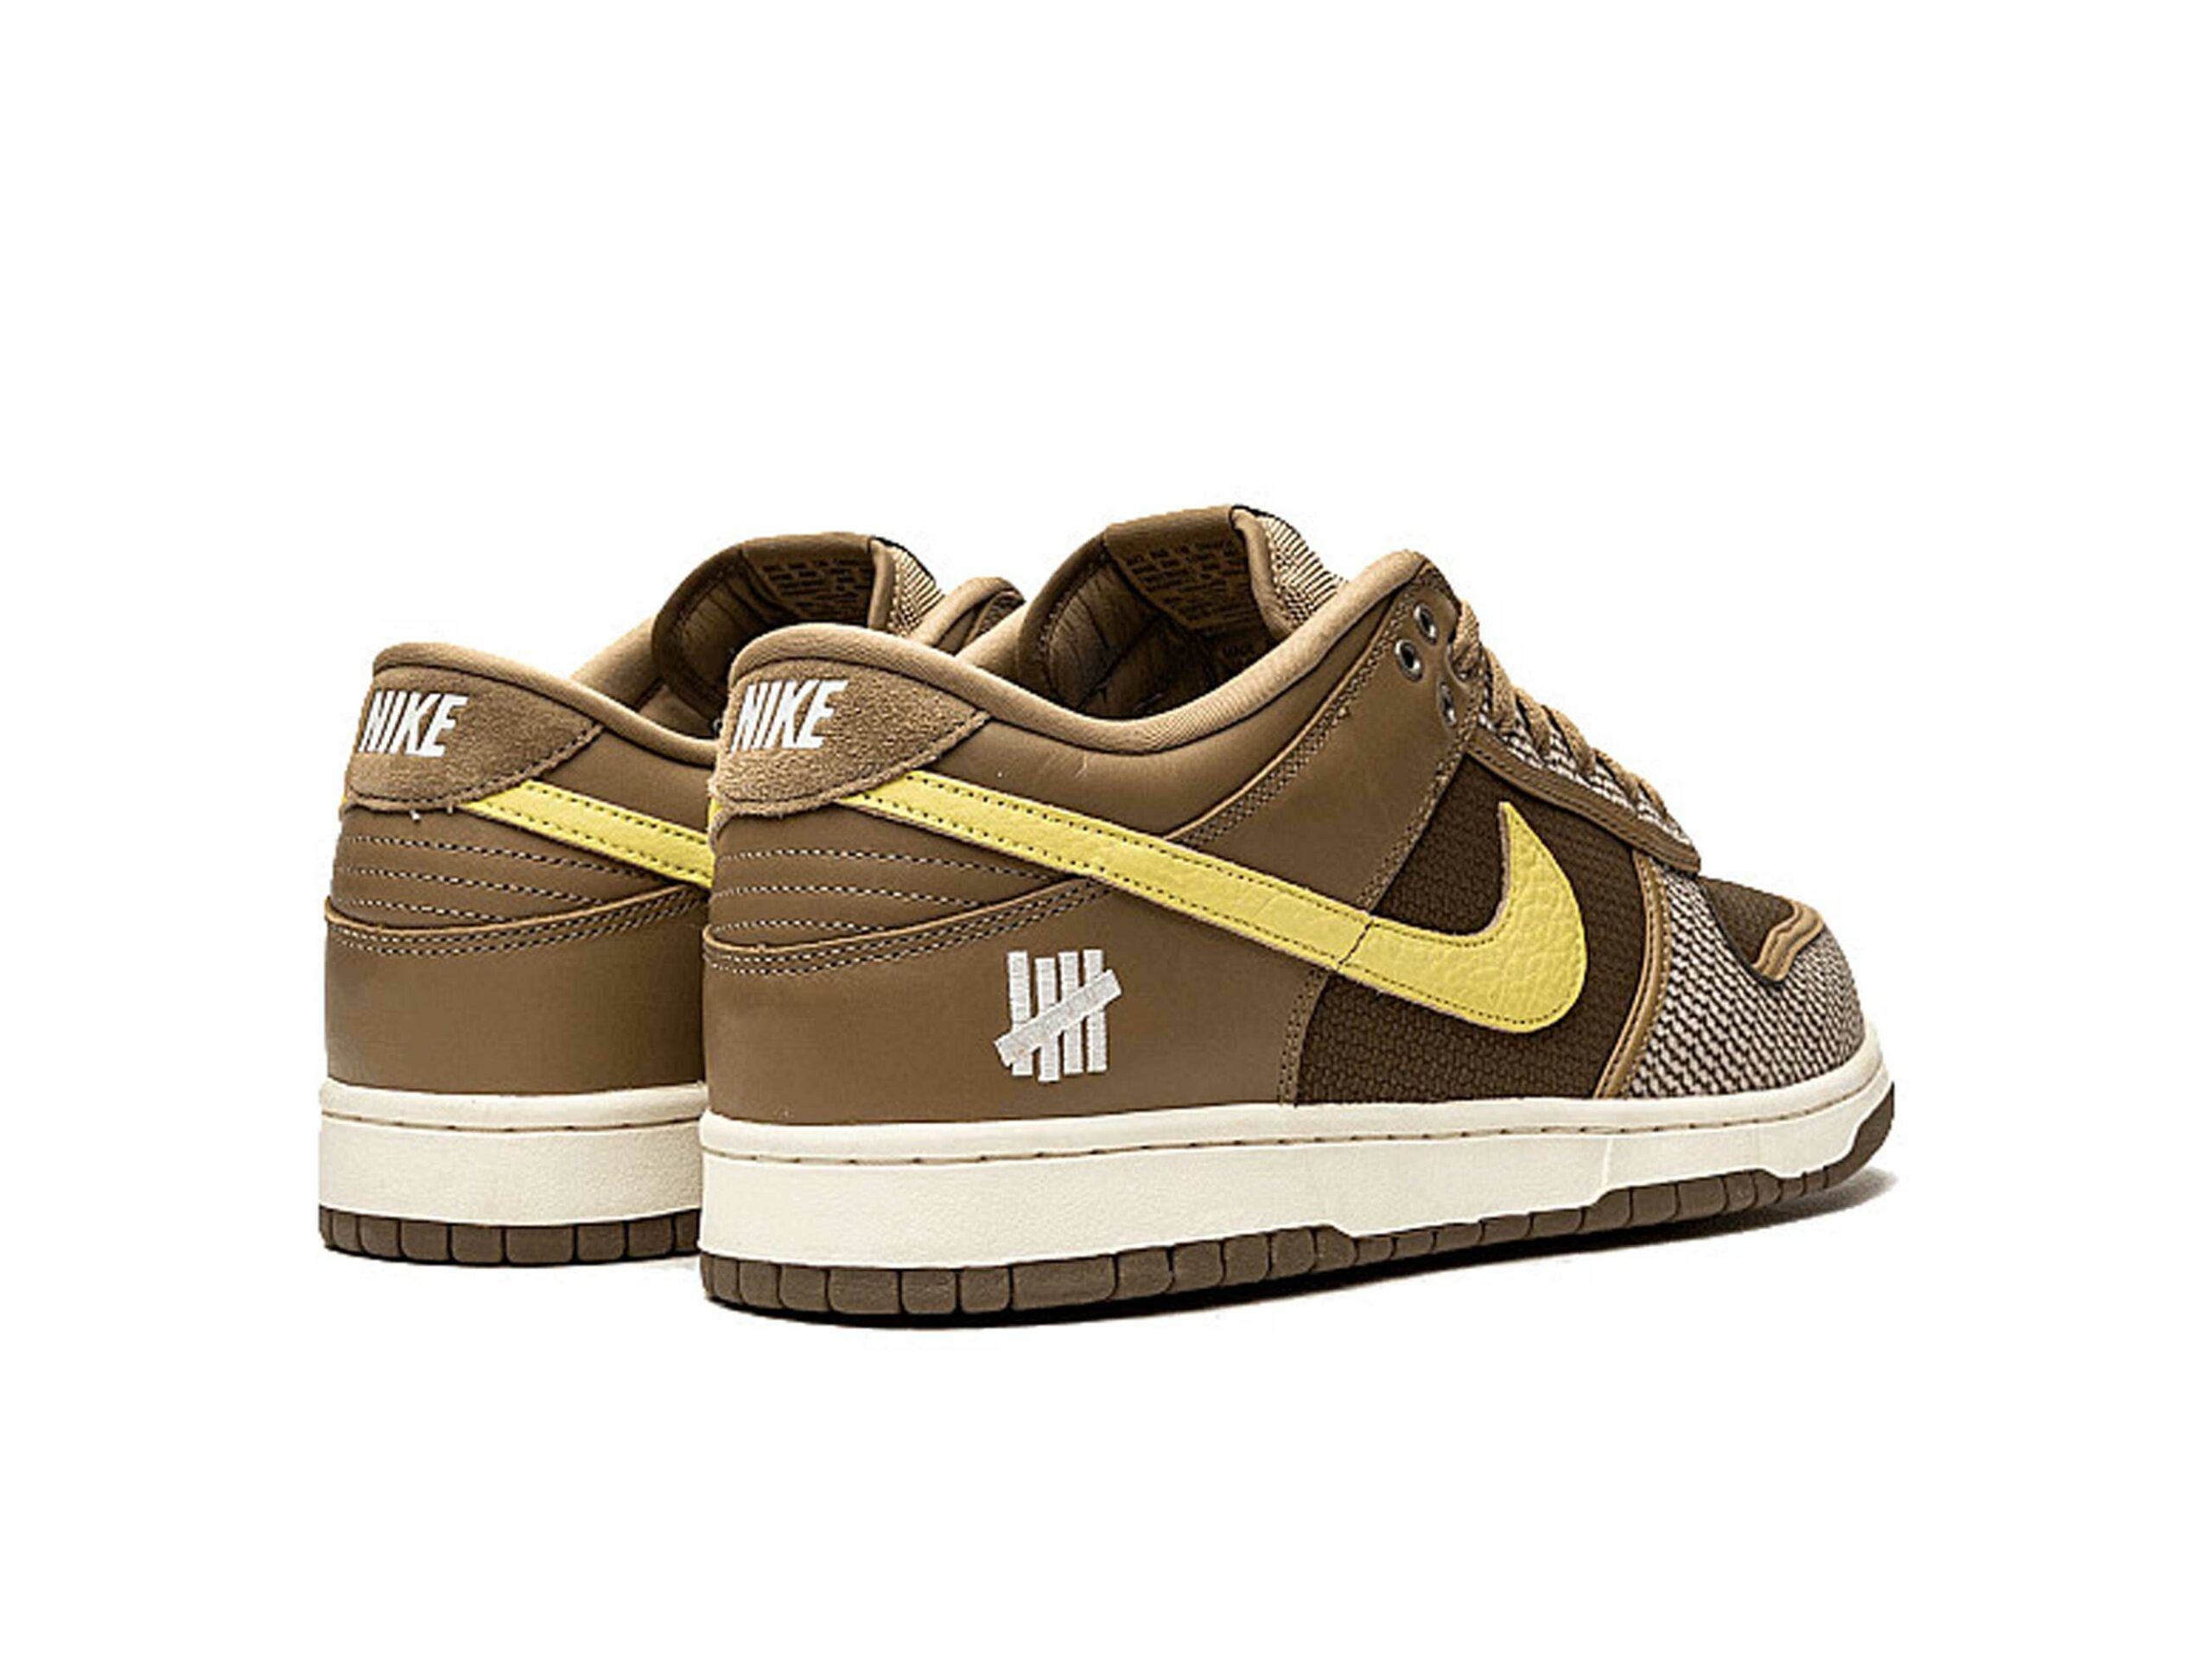 nike dunk low sp undefeated canteen dunk vs. AF1 pack DH3061_200 купить